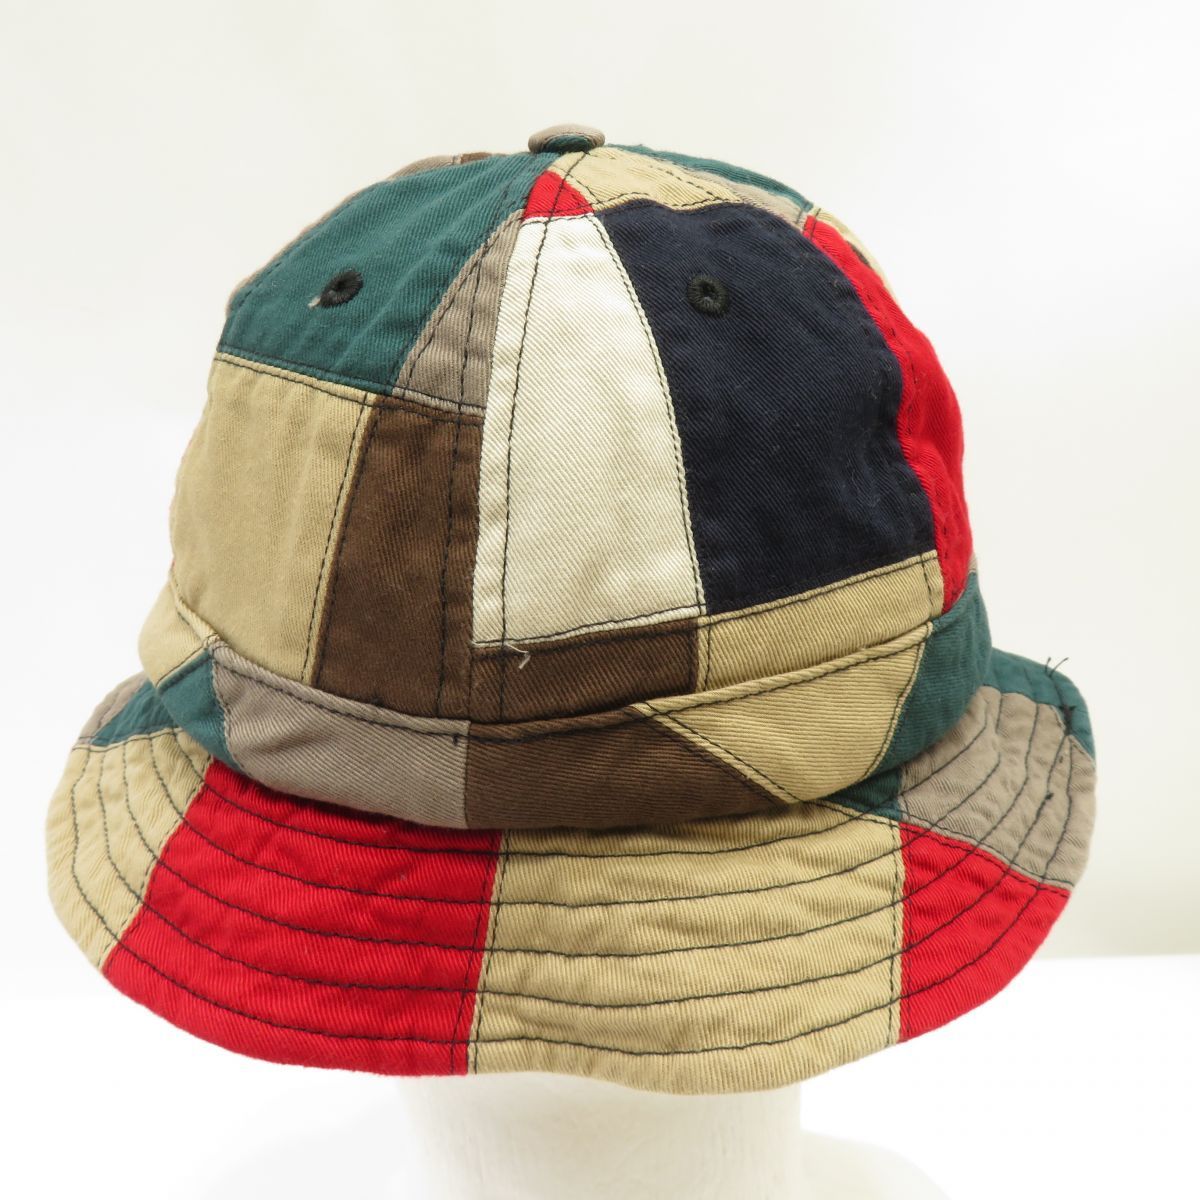 Supreme Patchwork Bell Hat パッチワーク バケット-